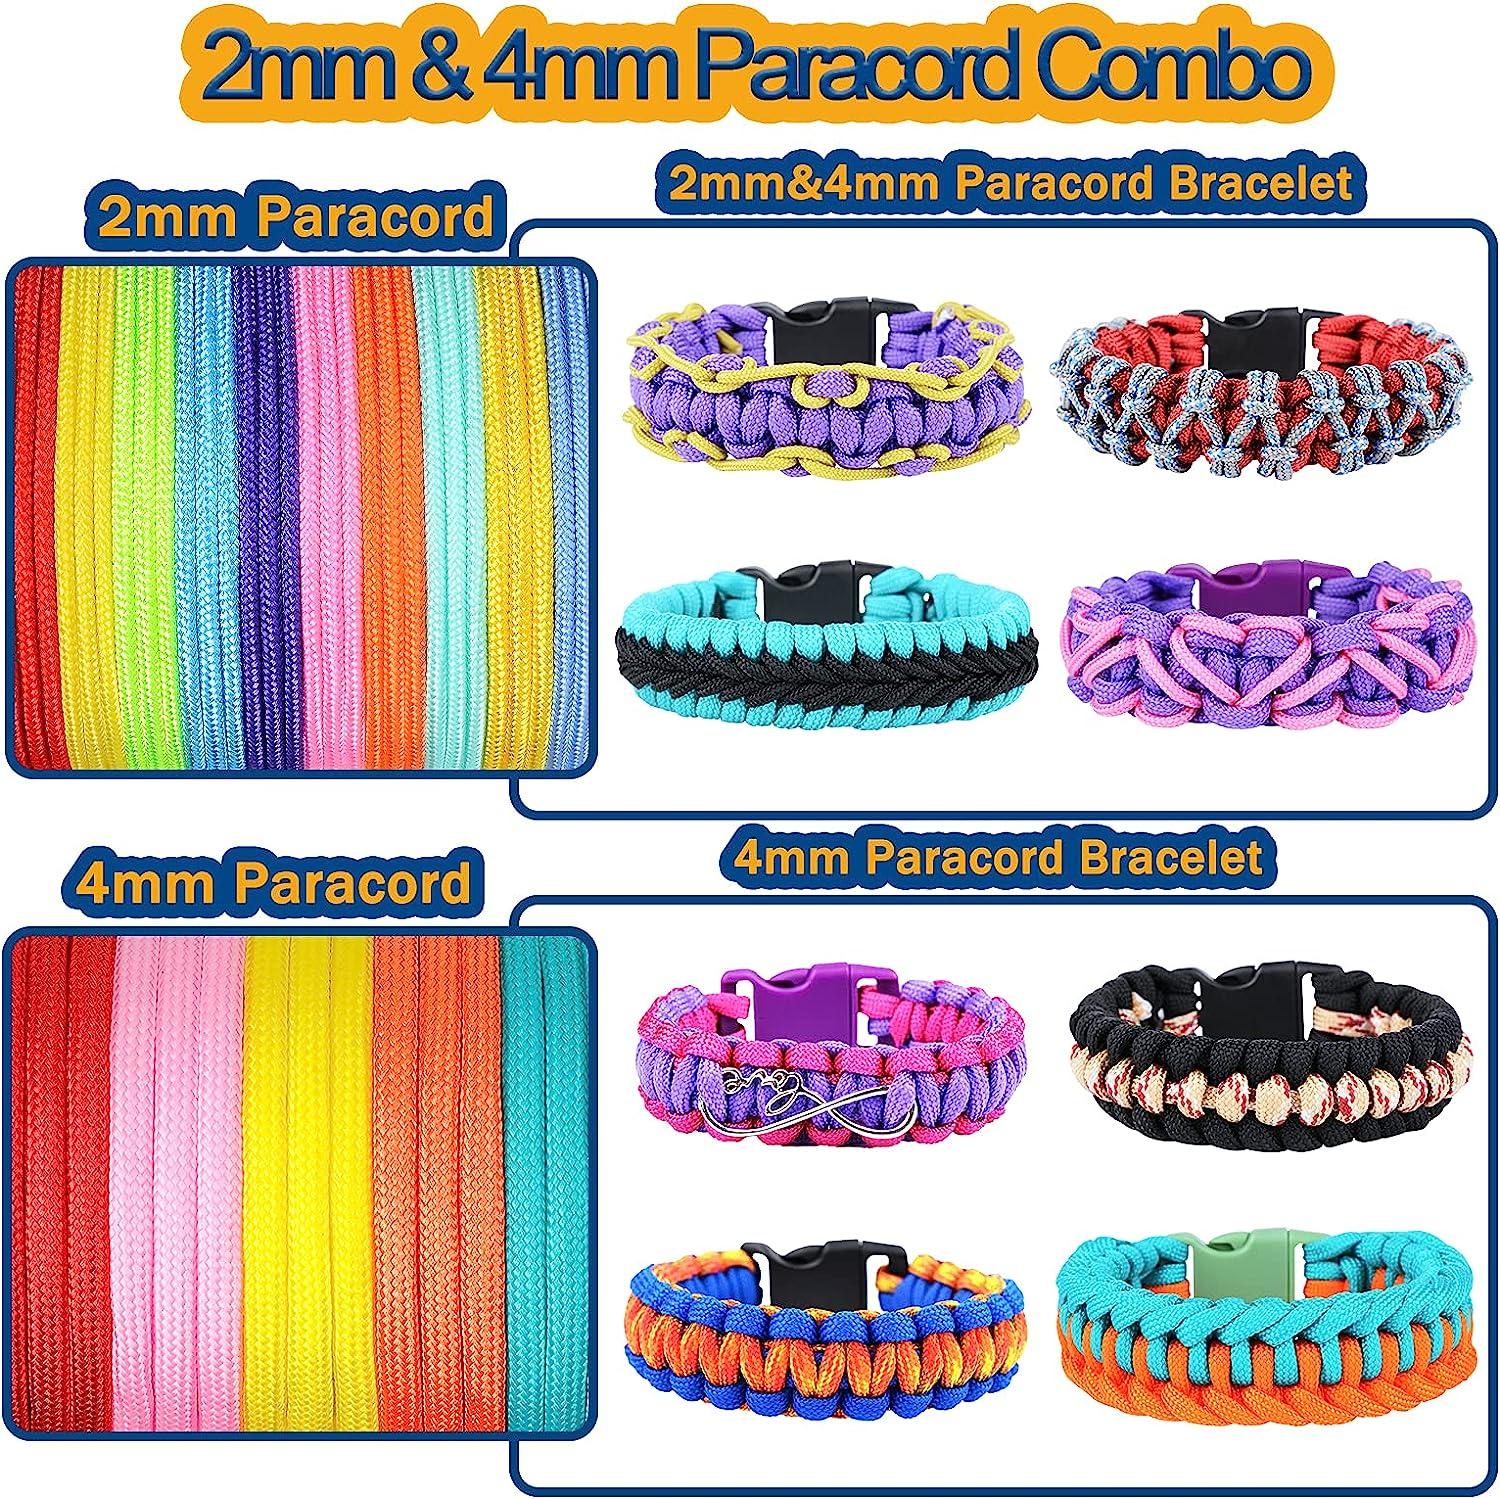 550 Paracord Combo Kit with Instruction Book - 36 Colors